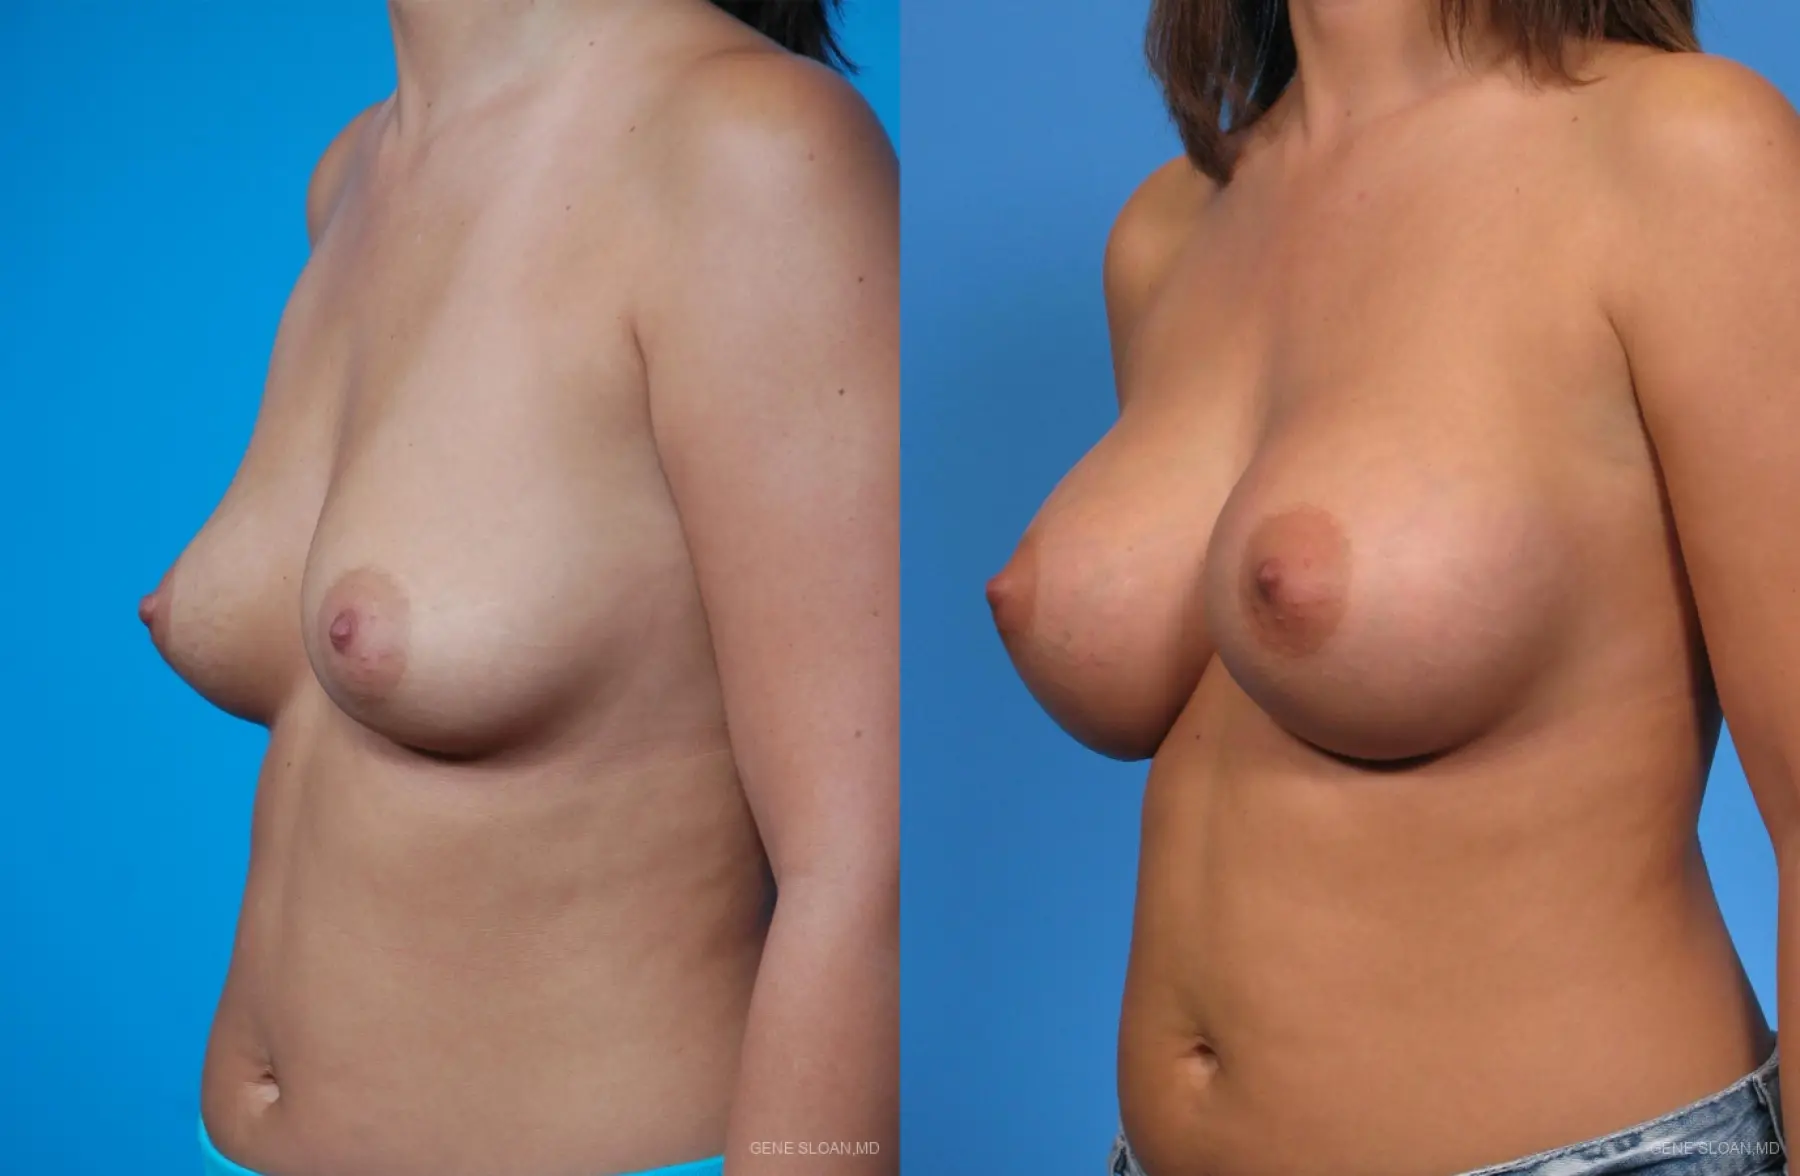 Breast Augmentation: Patient 1 - Before and After 2